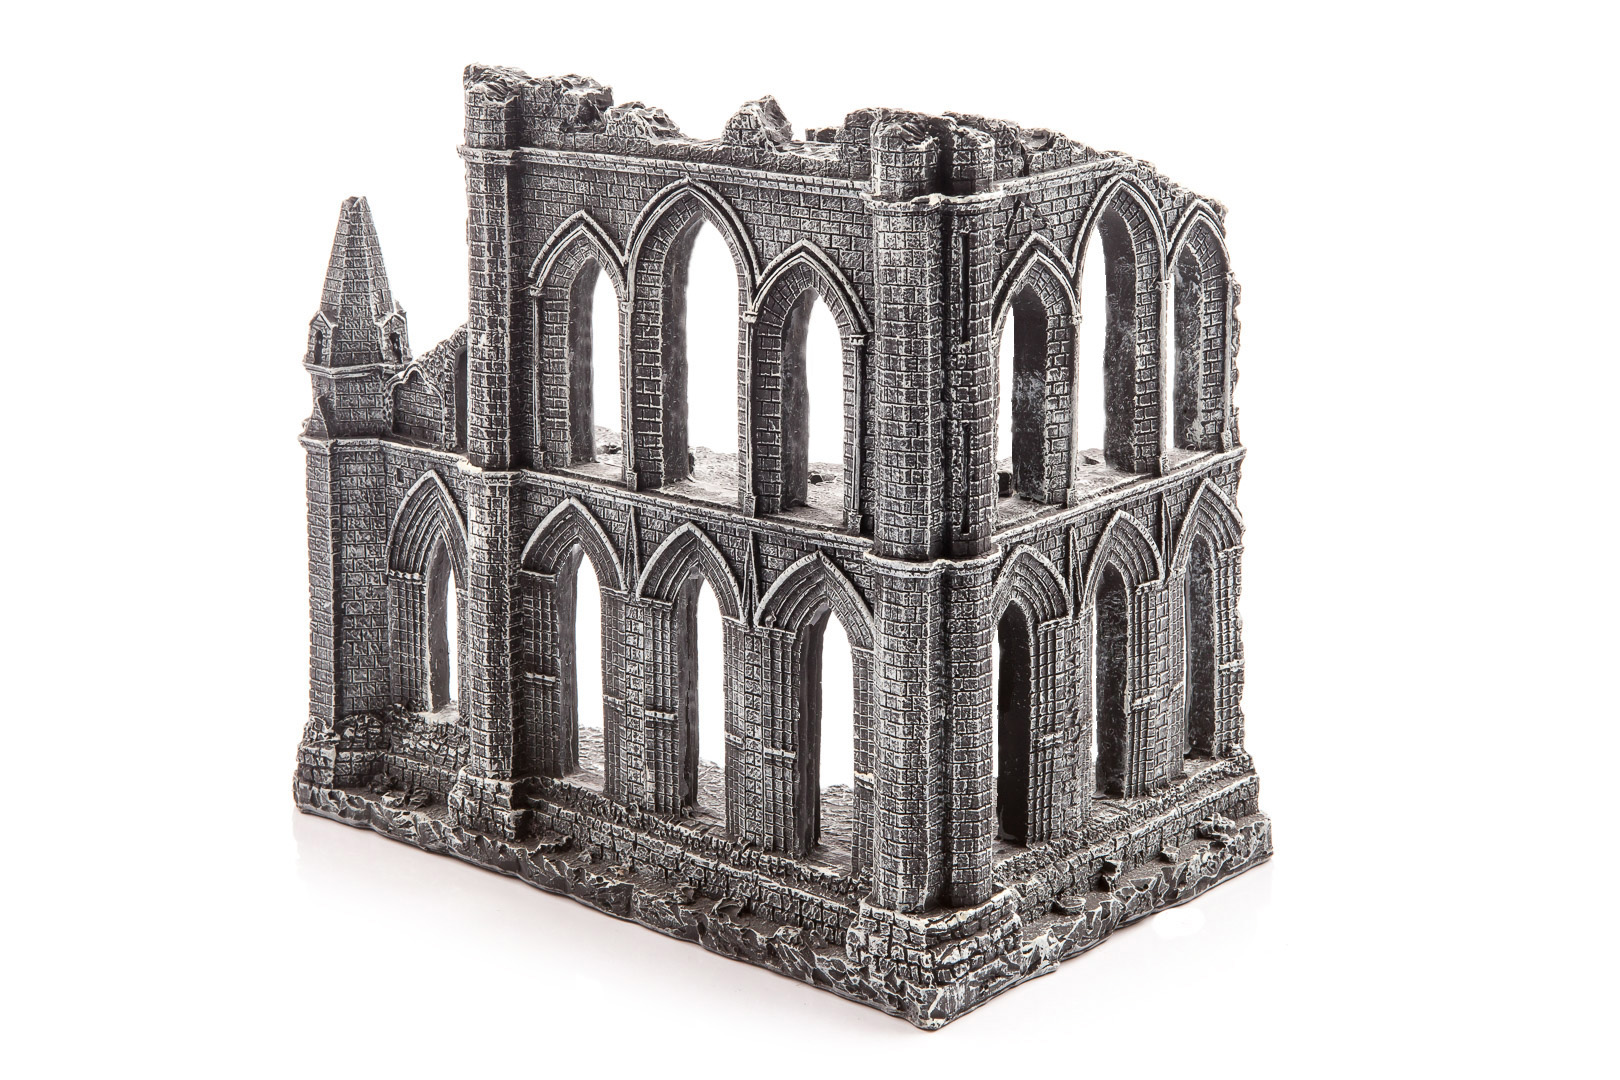 Gothic Ruins pre-painted scenery back in stock! GAMEMAT.EU